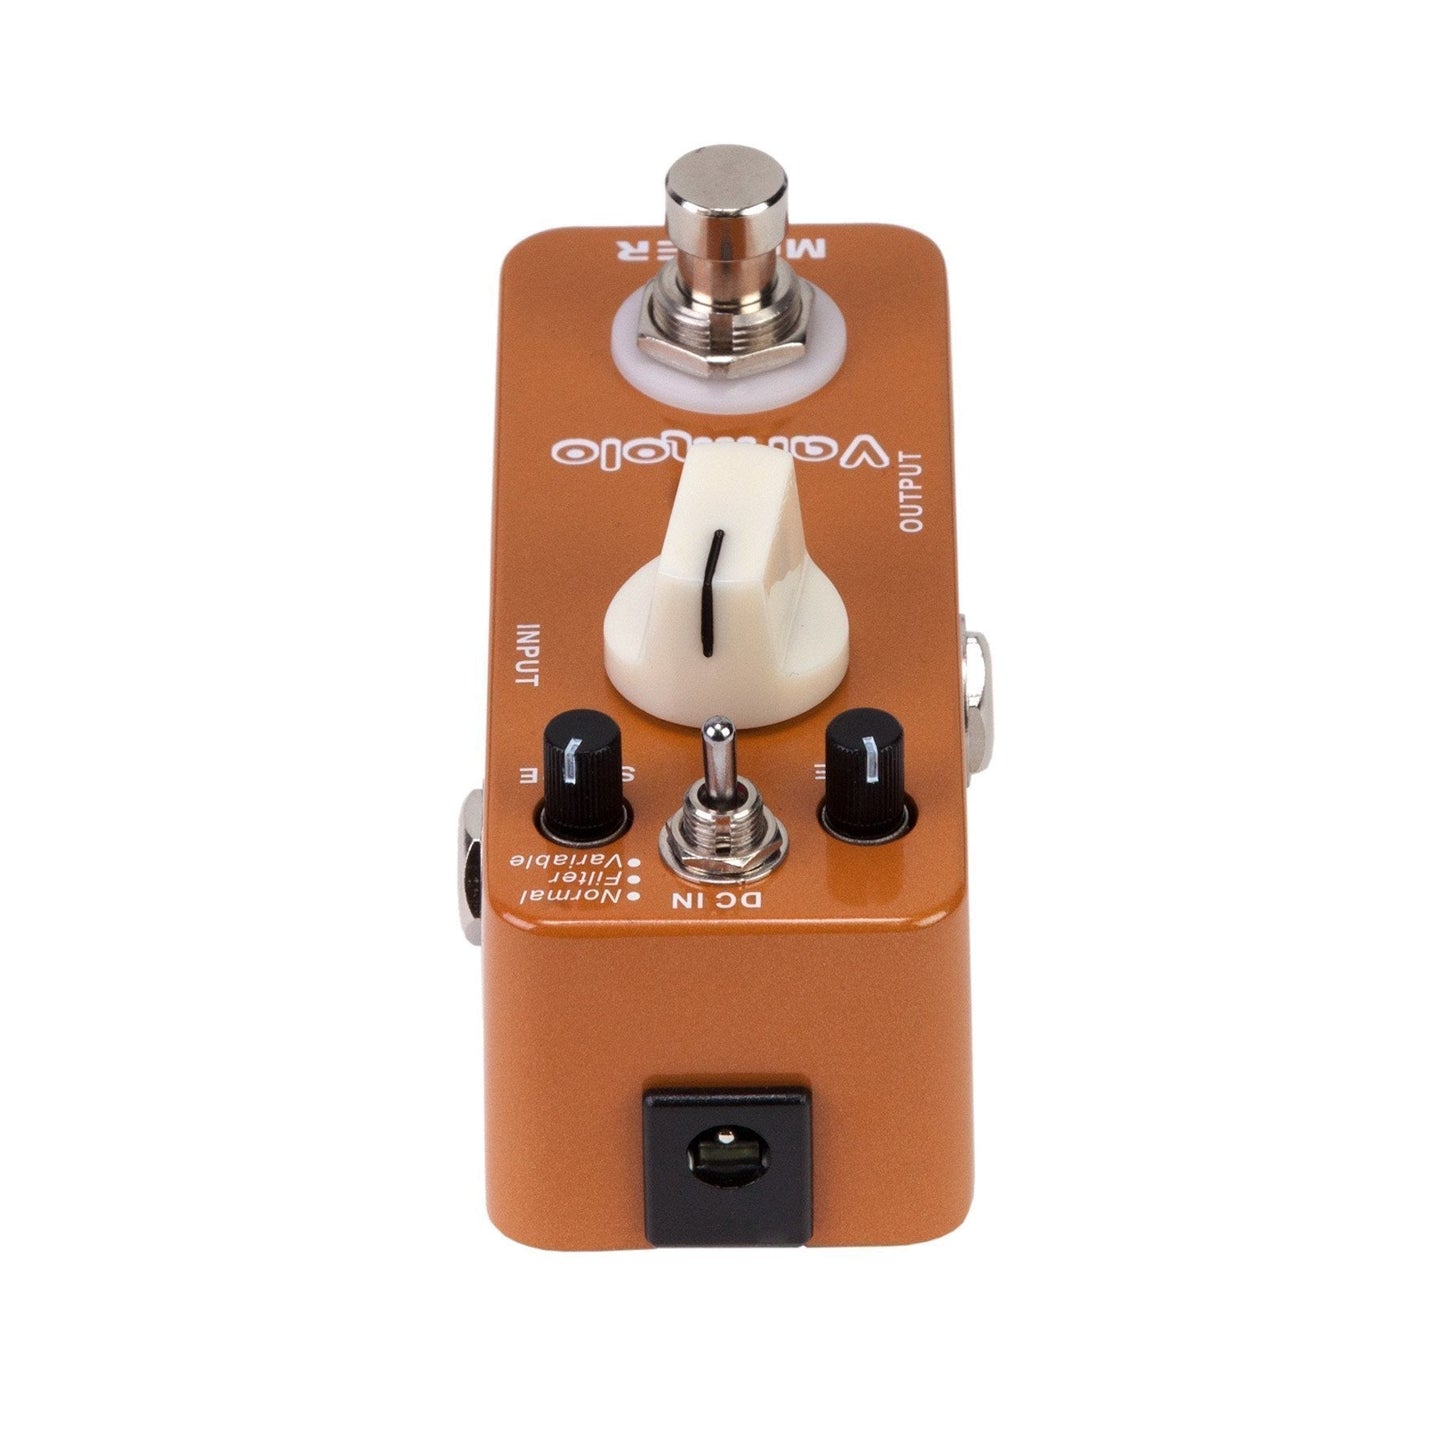 Load image into Gallery viewer, Mooer Varimolo Tremolo Micro Guitar Effects Pedal
